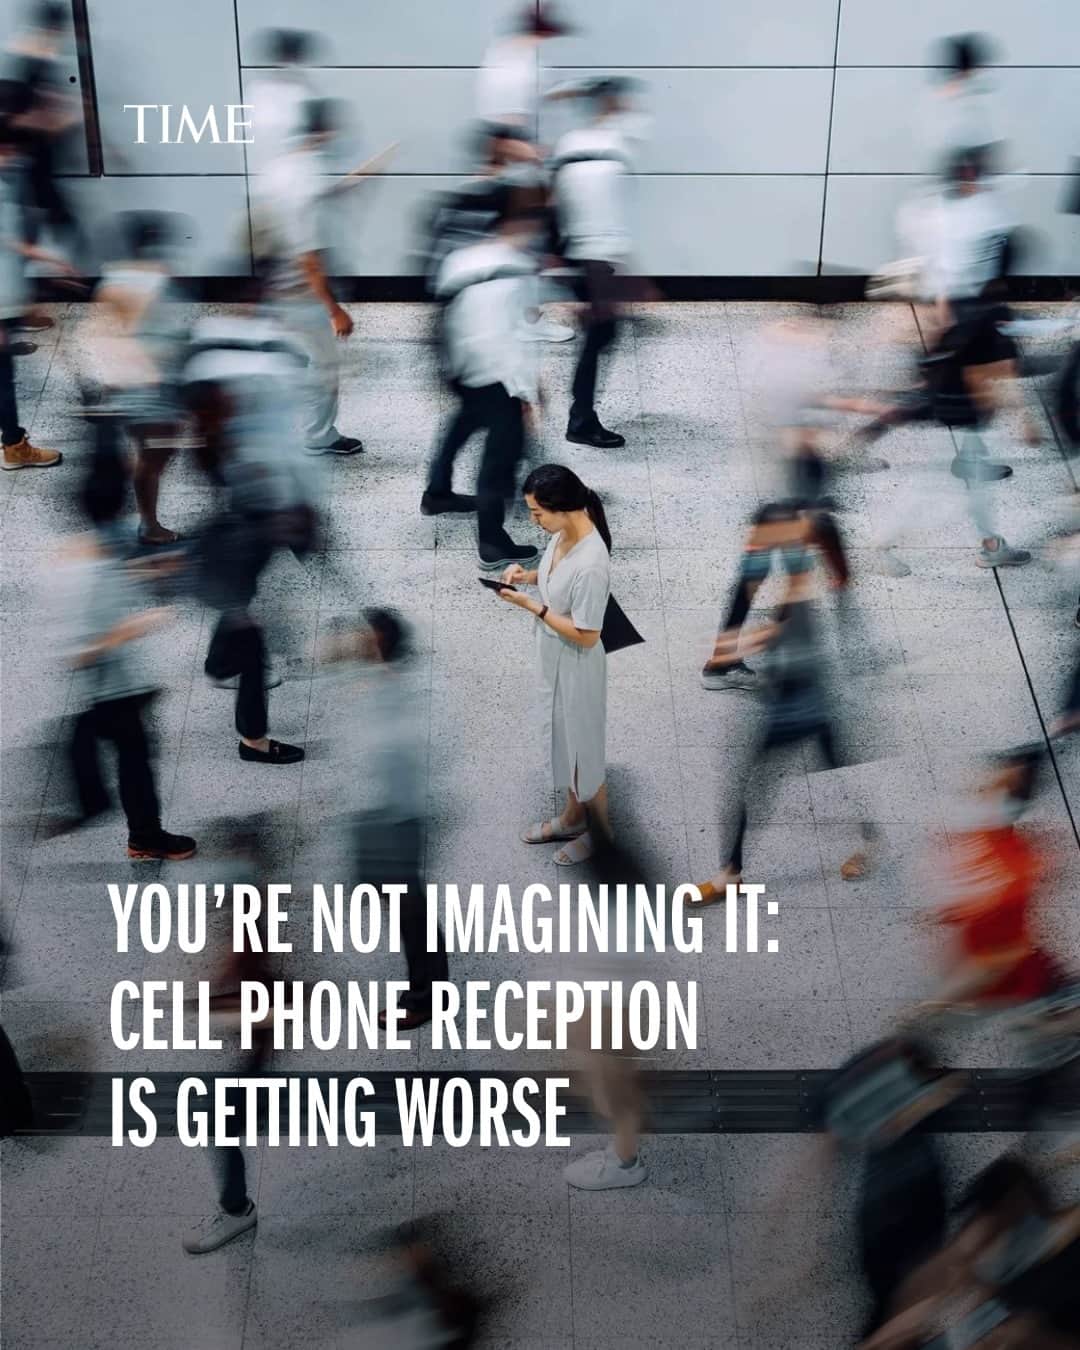 TIME Magazineのインスタグラム：「On average, between April and June of 2023, U.S. cellphone users reported that out of every 100 times they tried to use data, text, or make a call, they had problems 11 times.   That’s up from about nine problems per connection in most of 2020 and 2021, according to a report from J.D. Power & Associates. All three major carriers—Verizon, T-Mobile, and AT&T had worse scores on this metric in the first part of 2023 than they’d had in early 2021.   There’s no shortage of news stories in the past year about local areas complaining about a sudden uptick in dropped calls and spotty service. So what’s going on? Why, as we march forward into the future, half a century after the first mobile telephone call was made, do we still struggle so much with phone reception?   At the link in bio, TIME's Alana Semuels tries to find out.  Photograph by Getty」